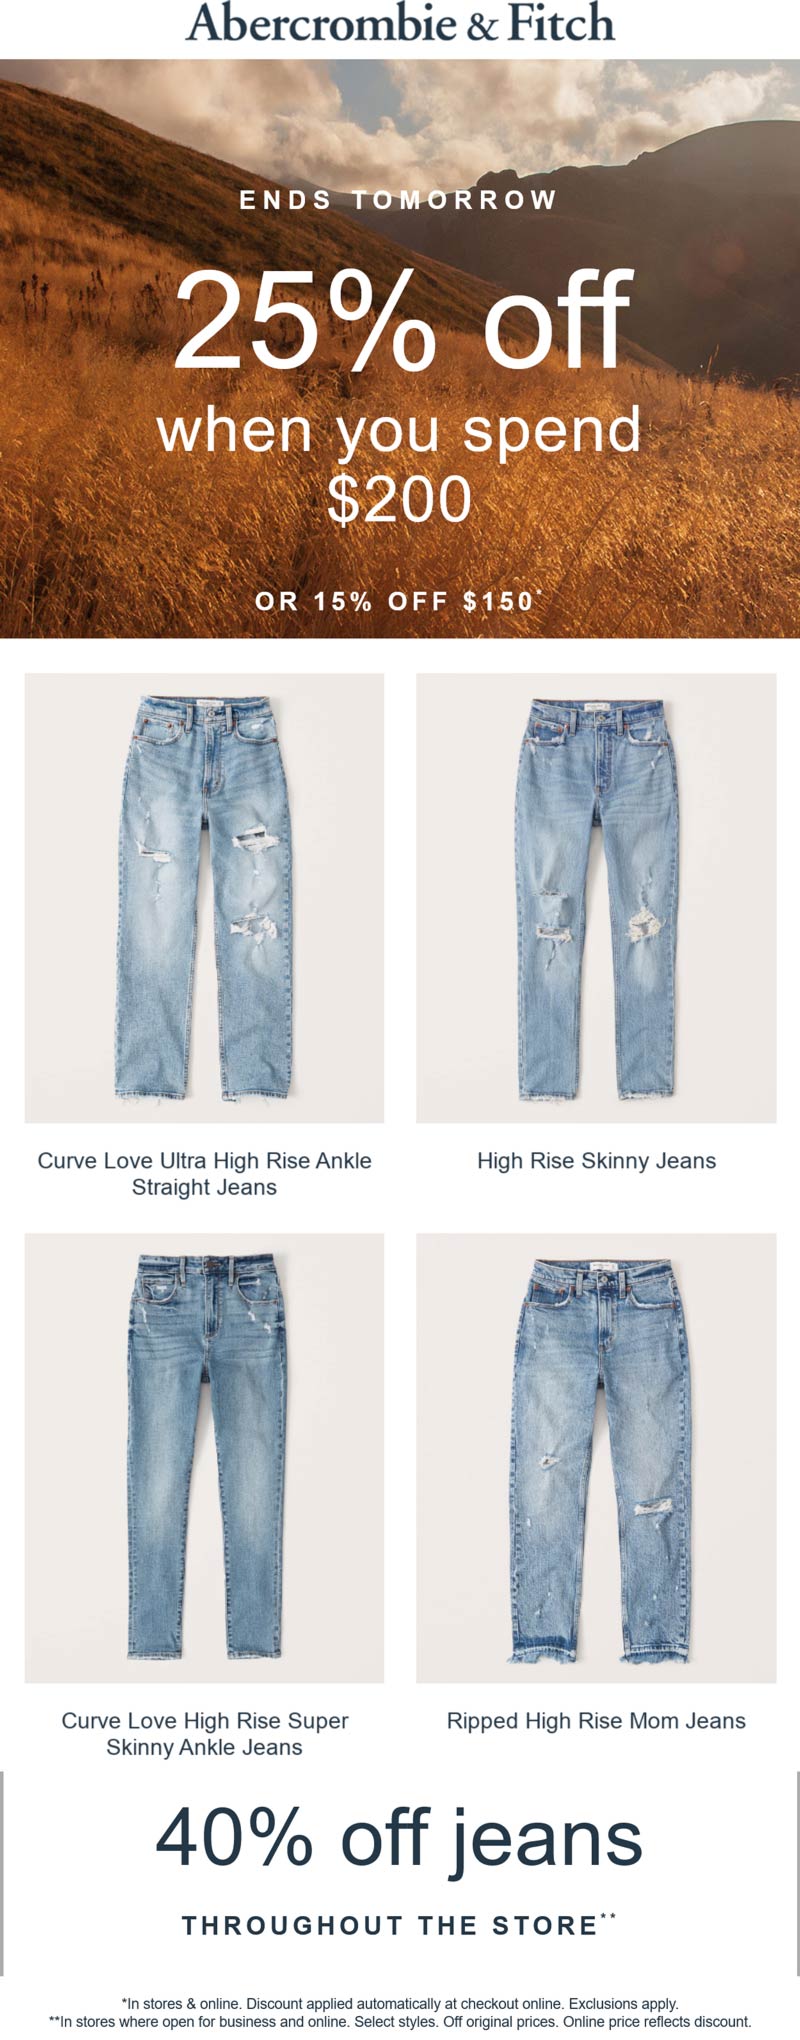 Abercrombie & Fitch stores Coupon  25% off $200 & 40% off all jeans at Abercrombie & Fitch, dito online #abercrombiefitch 